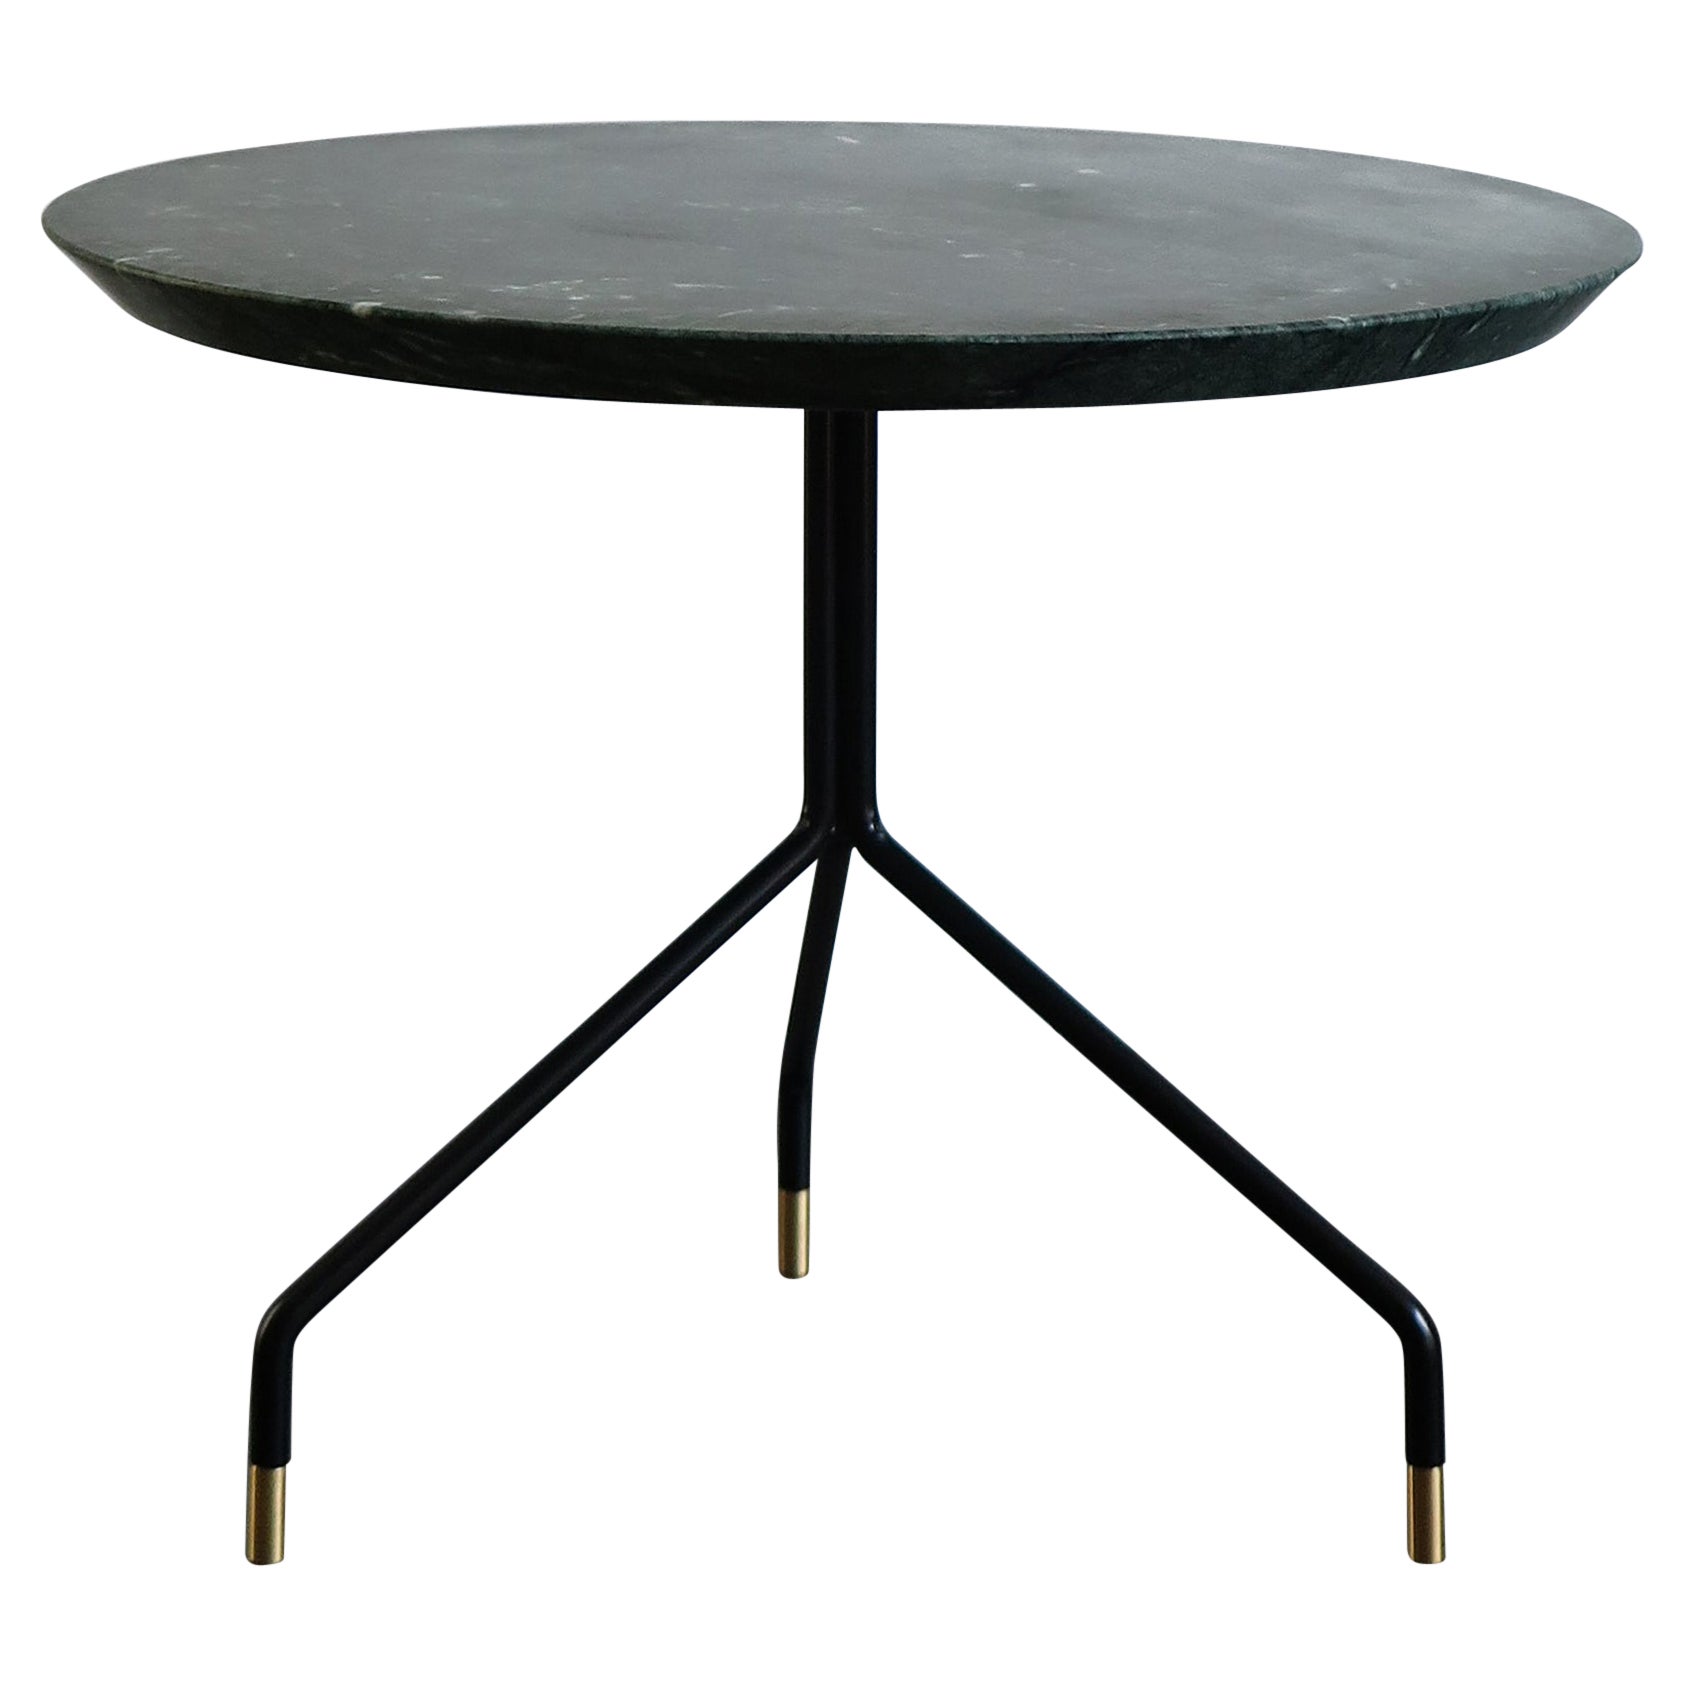 Italian Contemporary Marble Coffe Table New Desig Capperidicasa For Sale